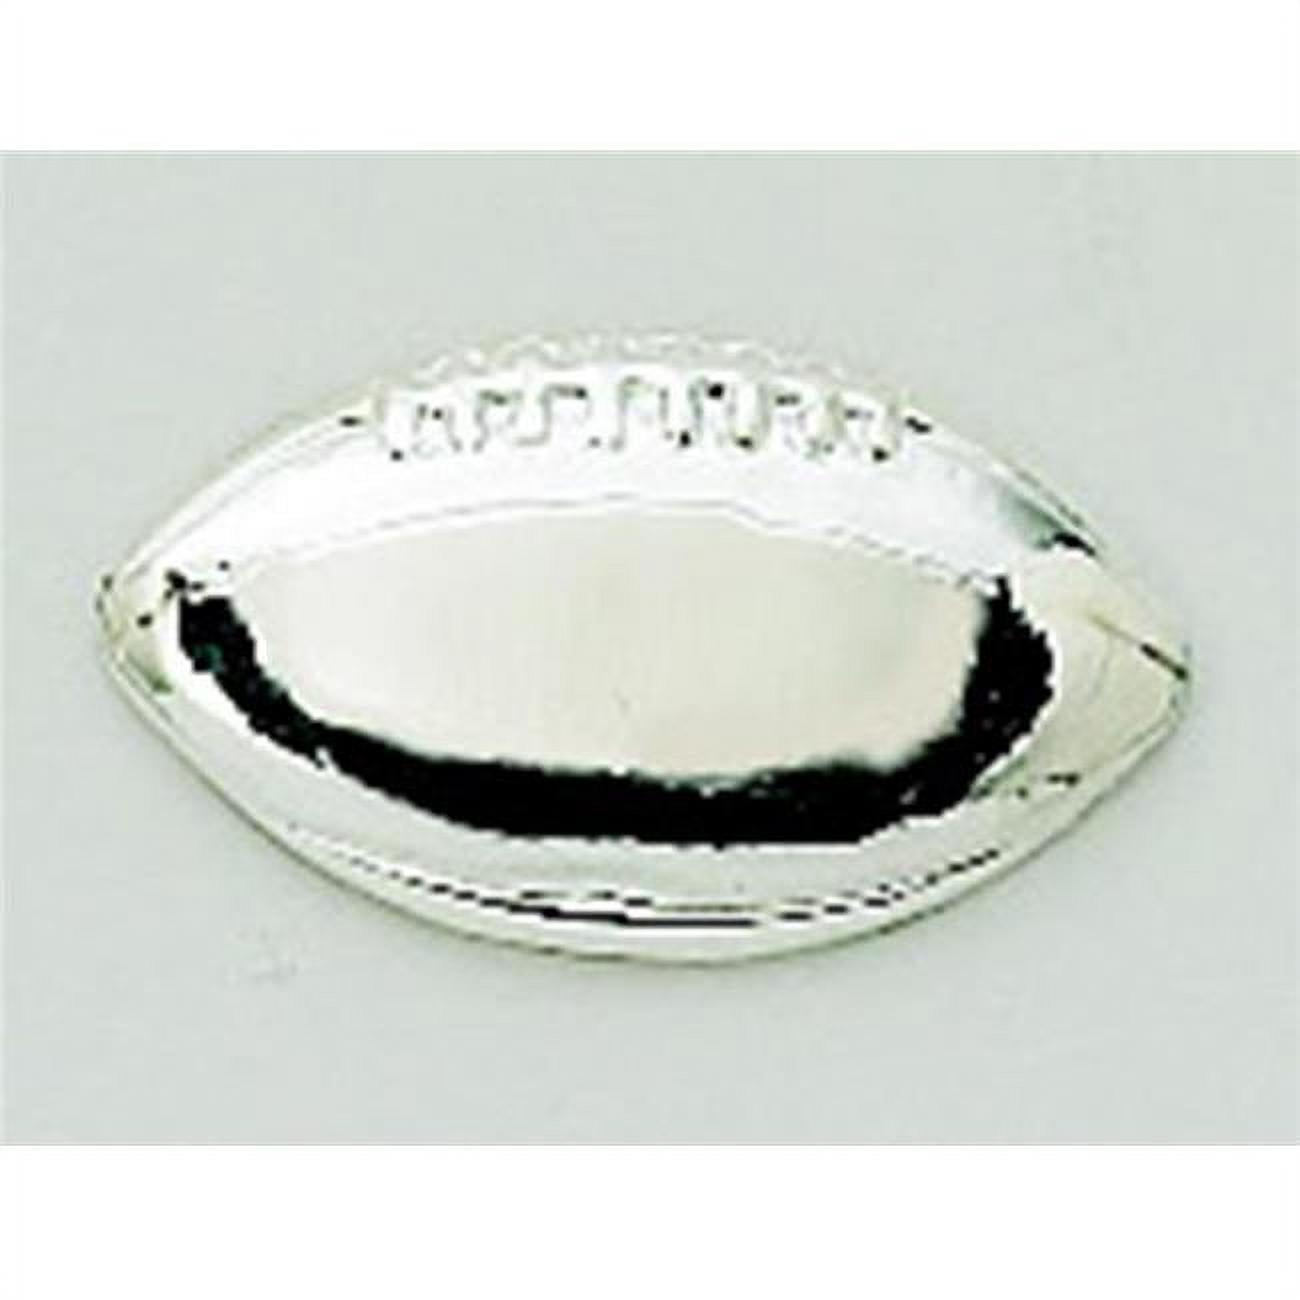 Picture of Creative Gifts International 013243 1 x .50 in. Peel & Press Football Icon - Silver Plated